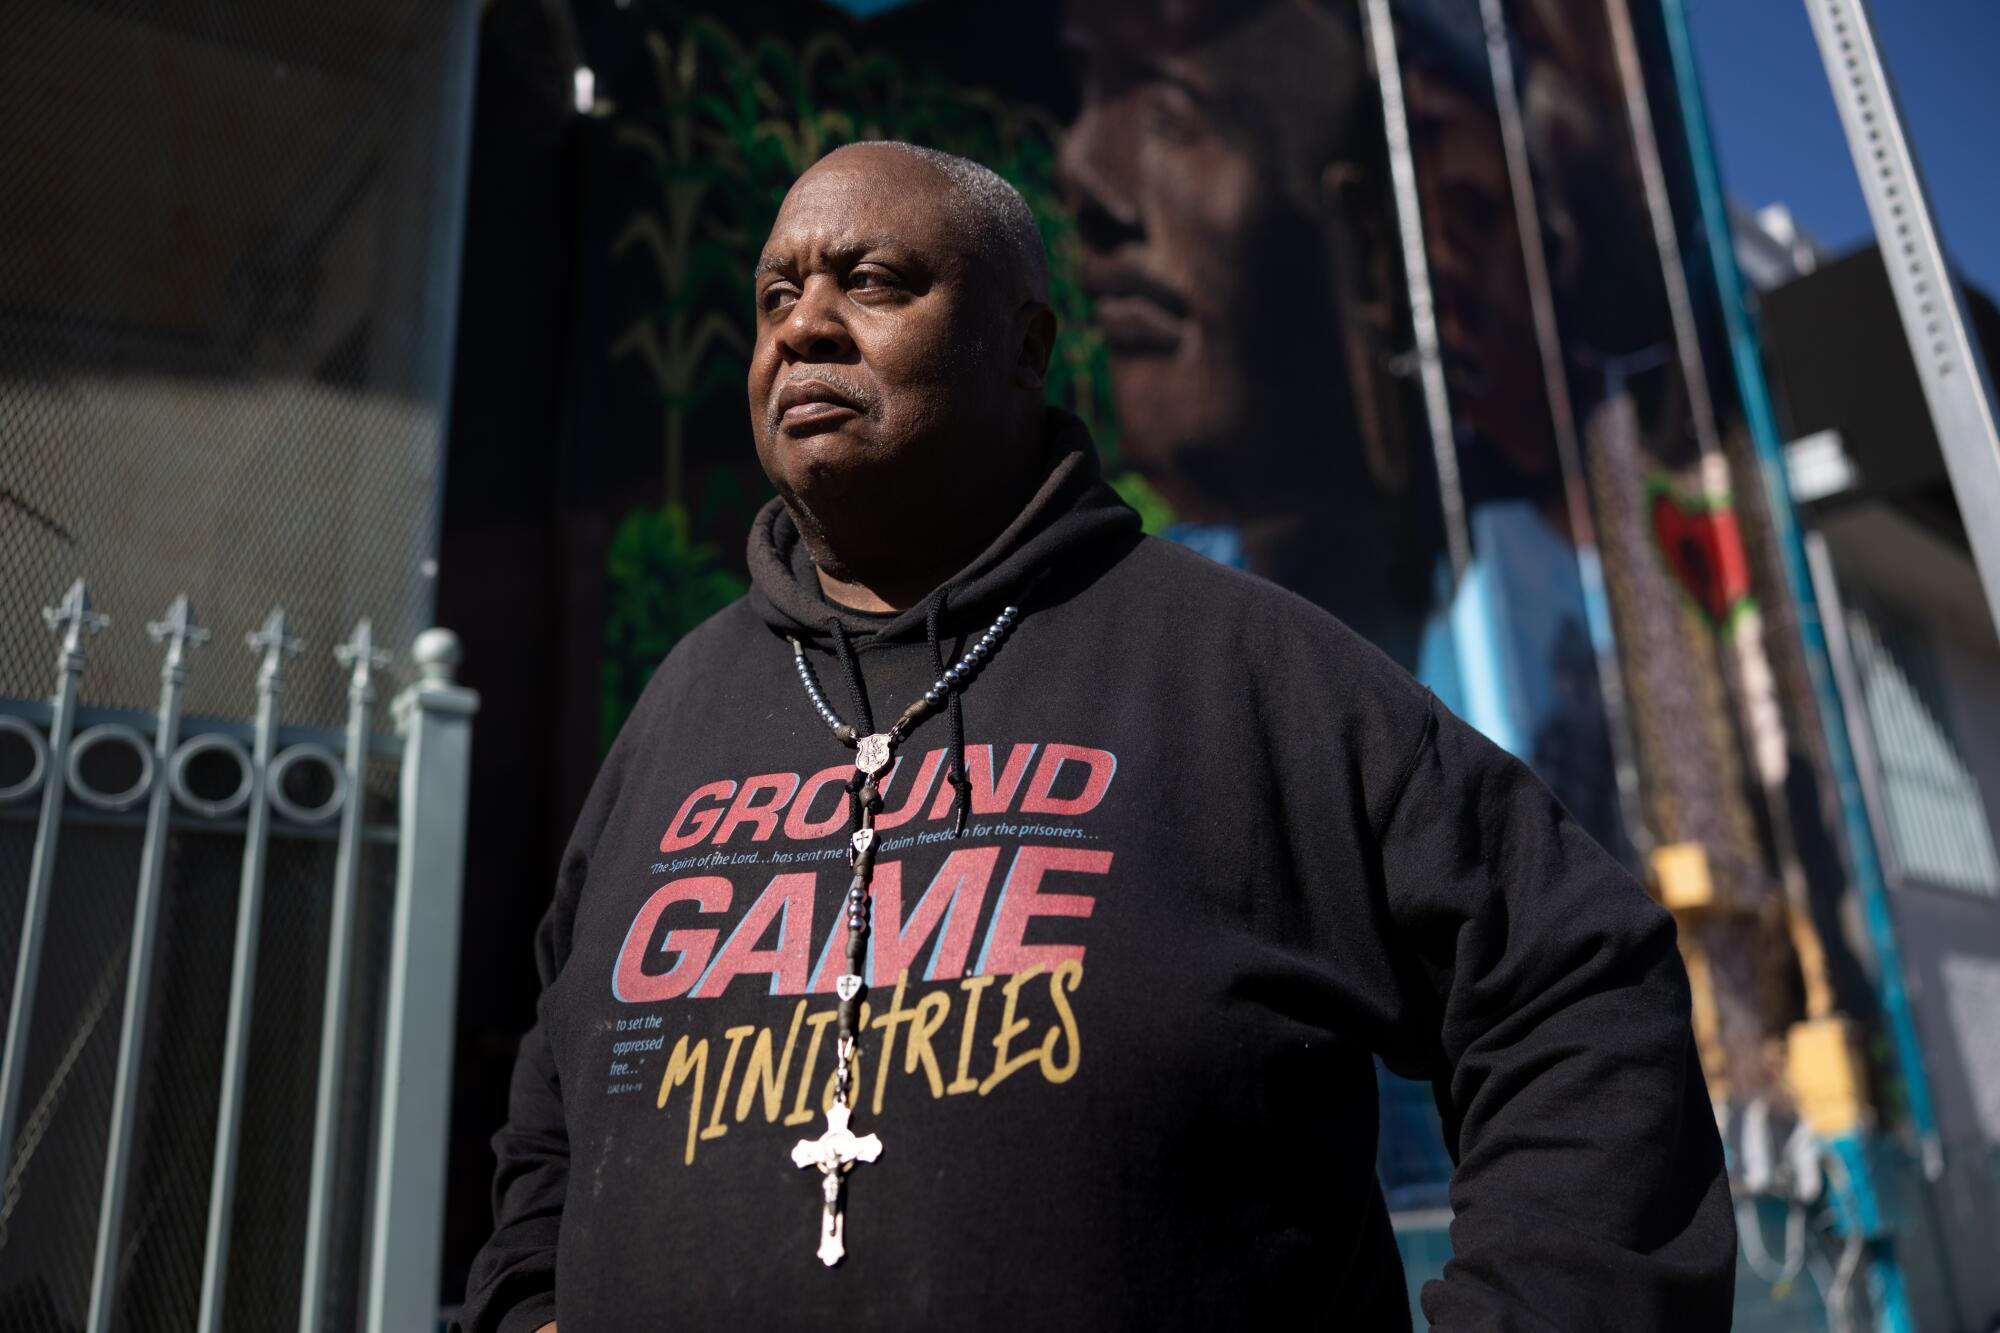 A man wearing a cross and a black hoodie reading "Ground Game Ministries" stands front of a mural after dark